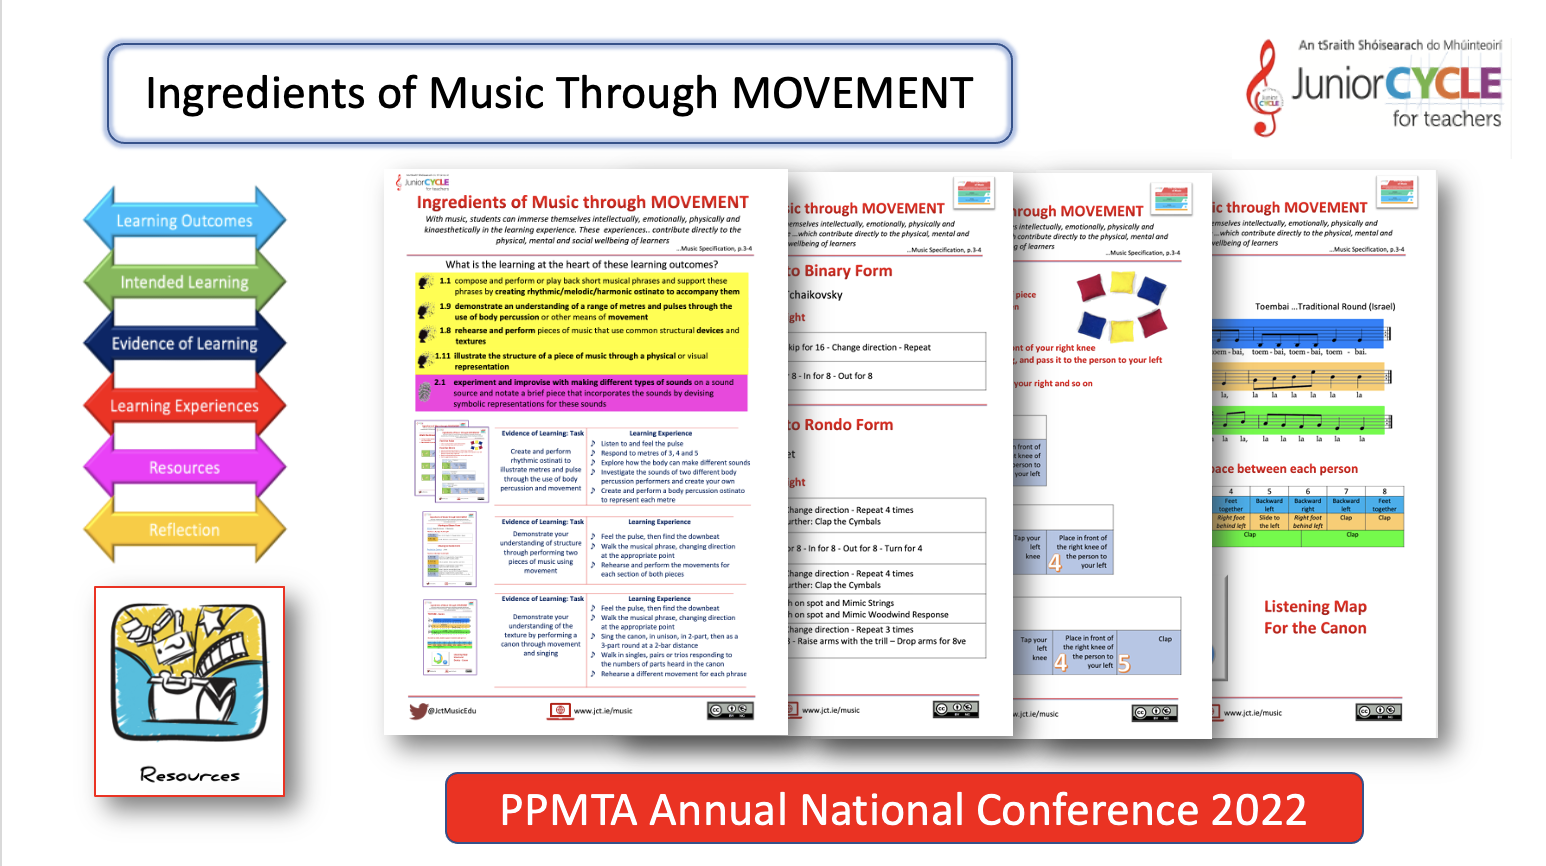 Link to Ingredients of Music Through Movement